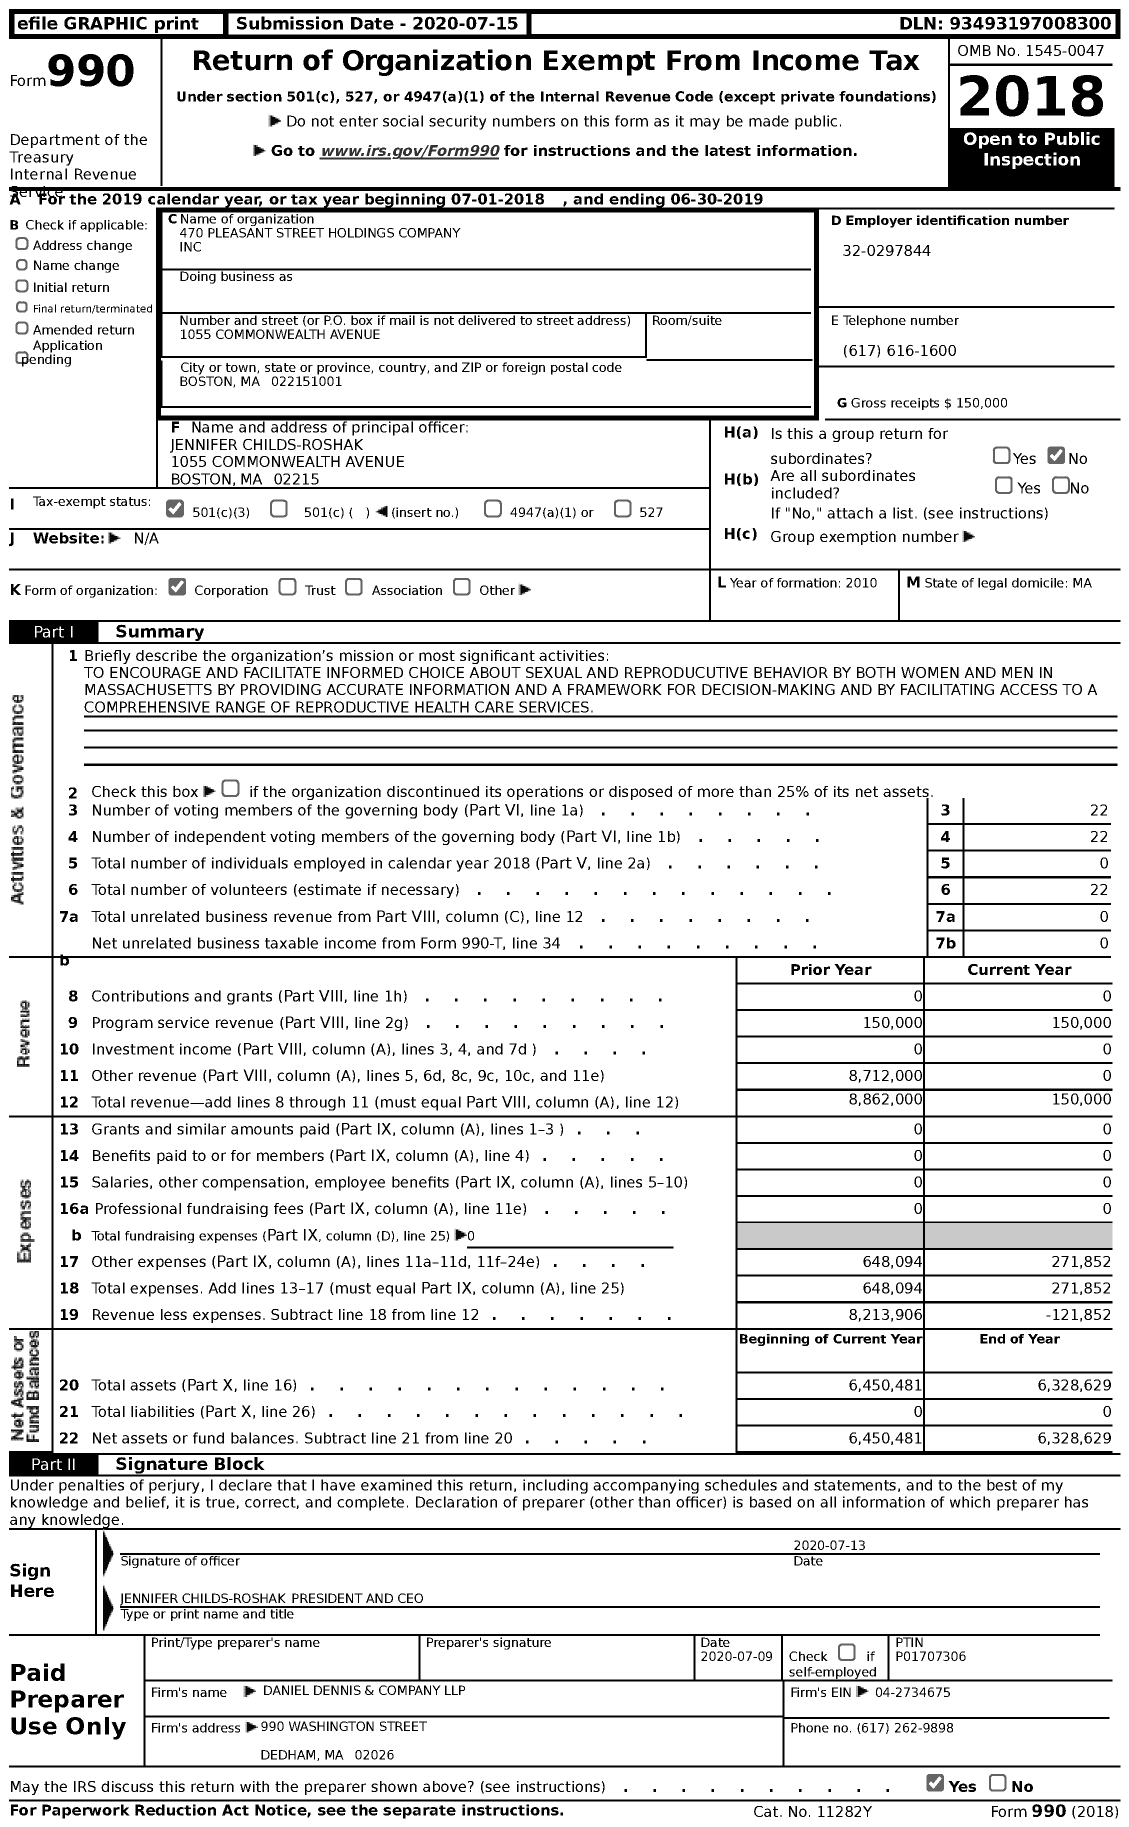 Image of first page of 2018 Form 990 for 470 Pleasant Street Holdings Company